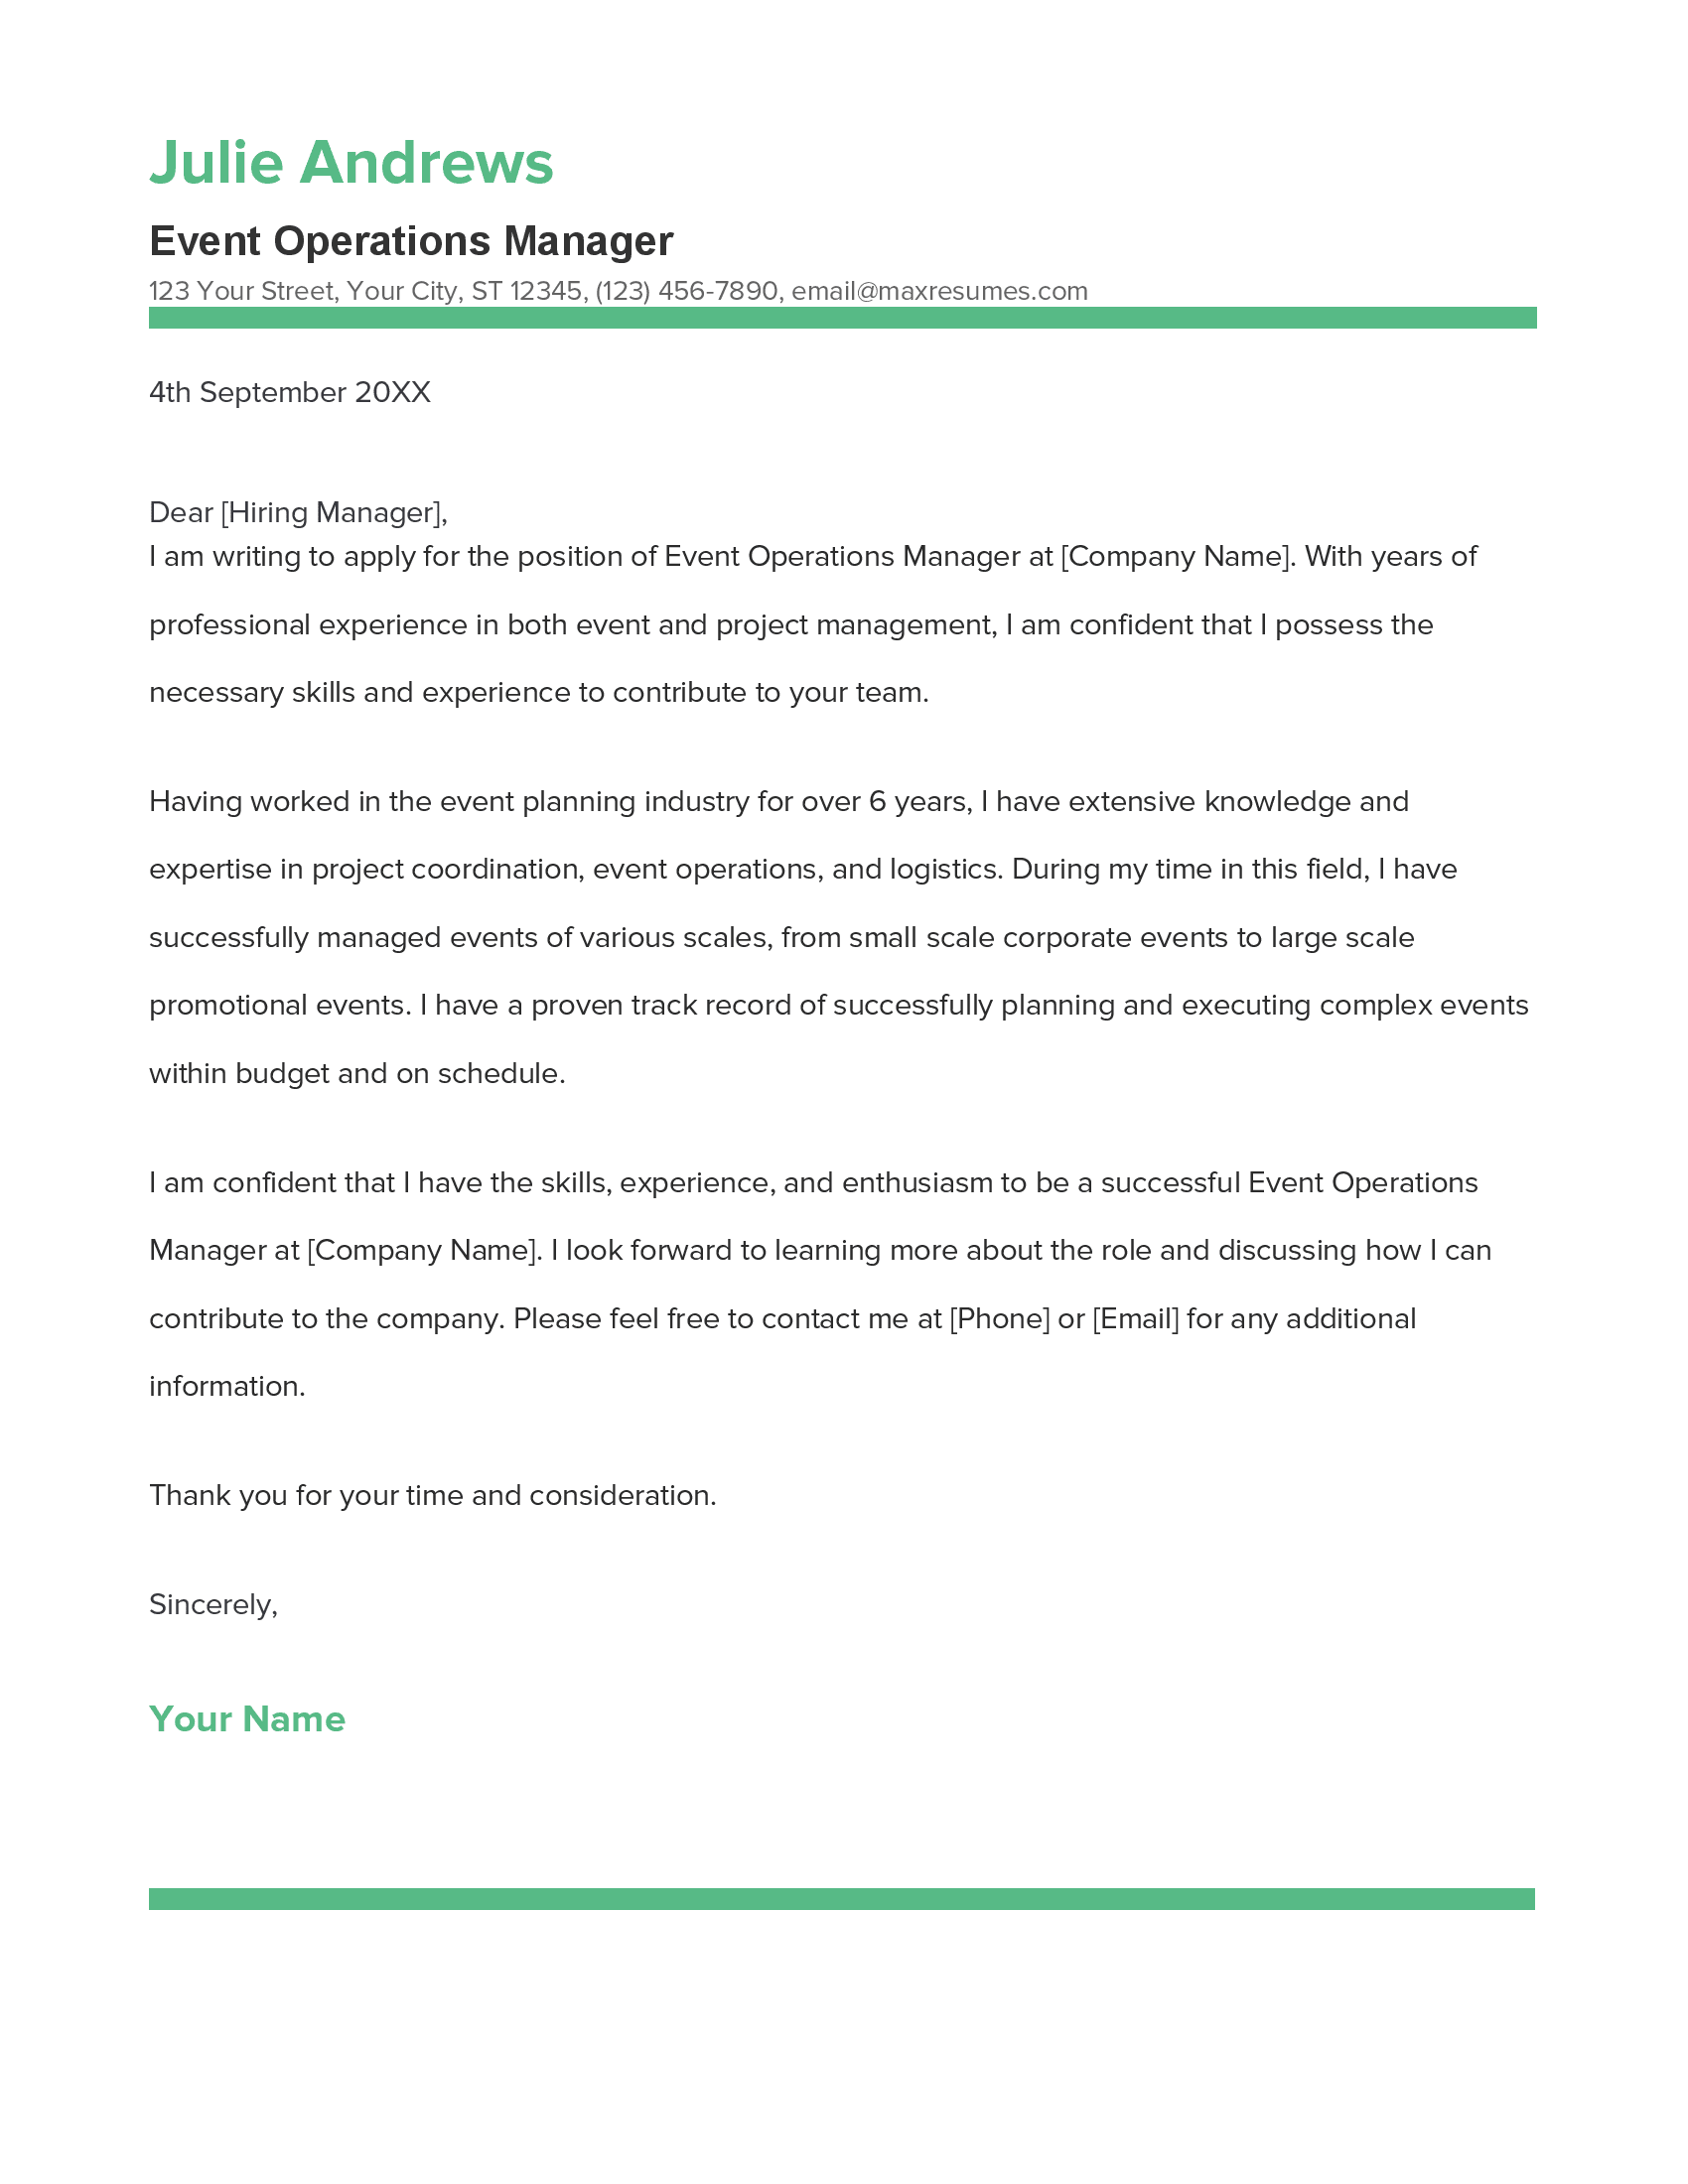 Event Operations Manager Cover Letter Example